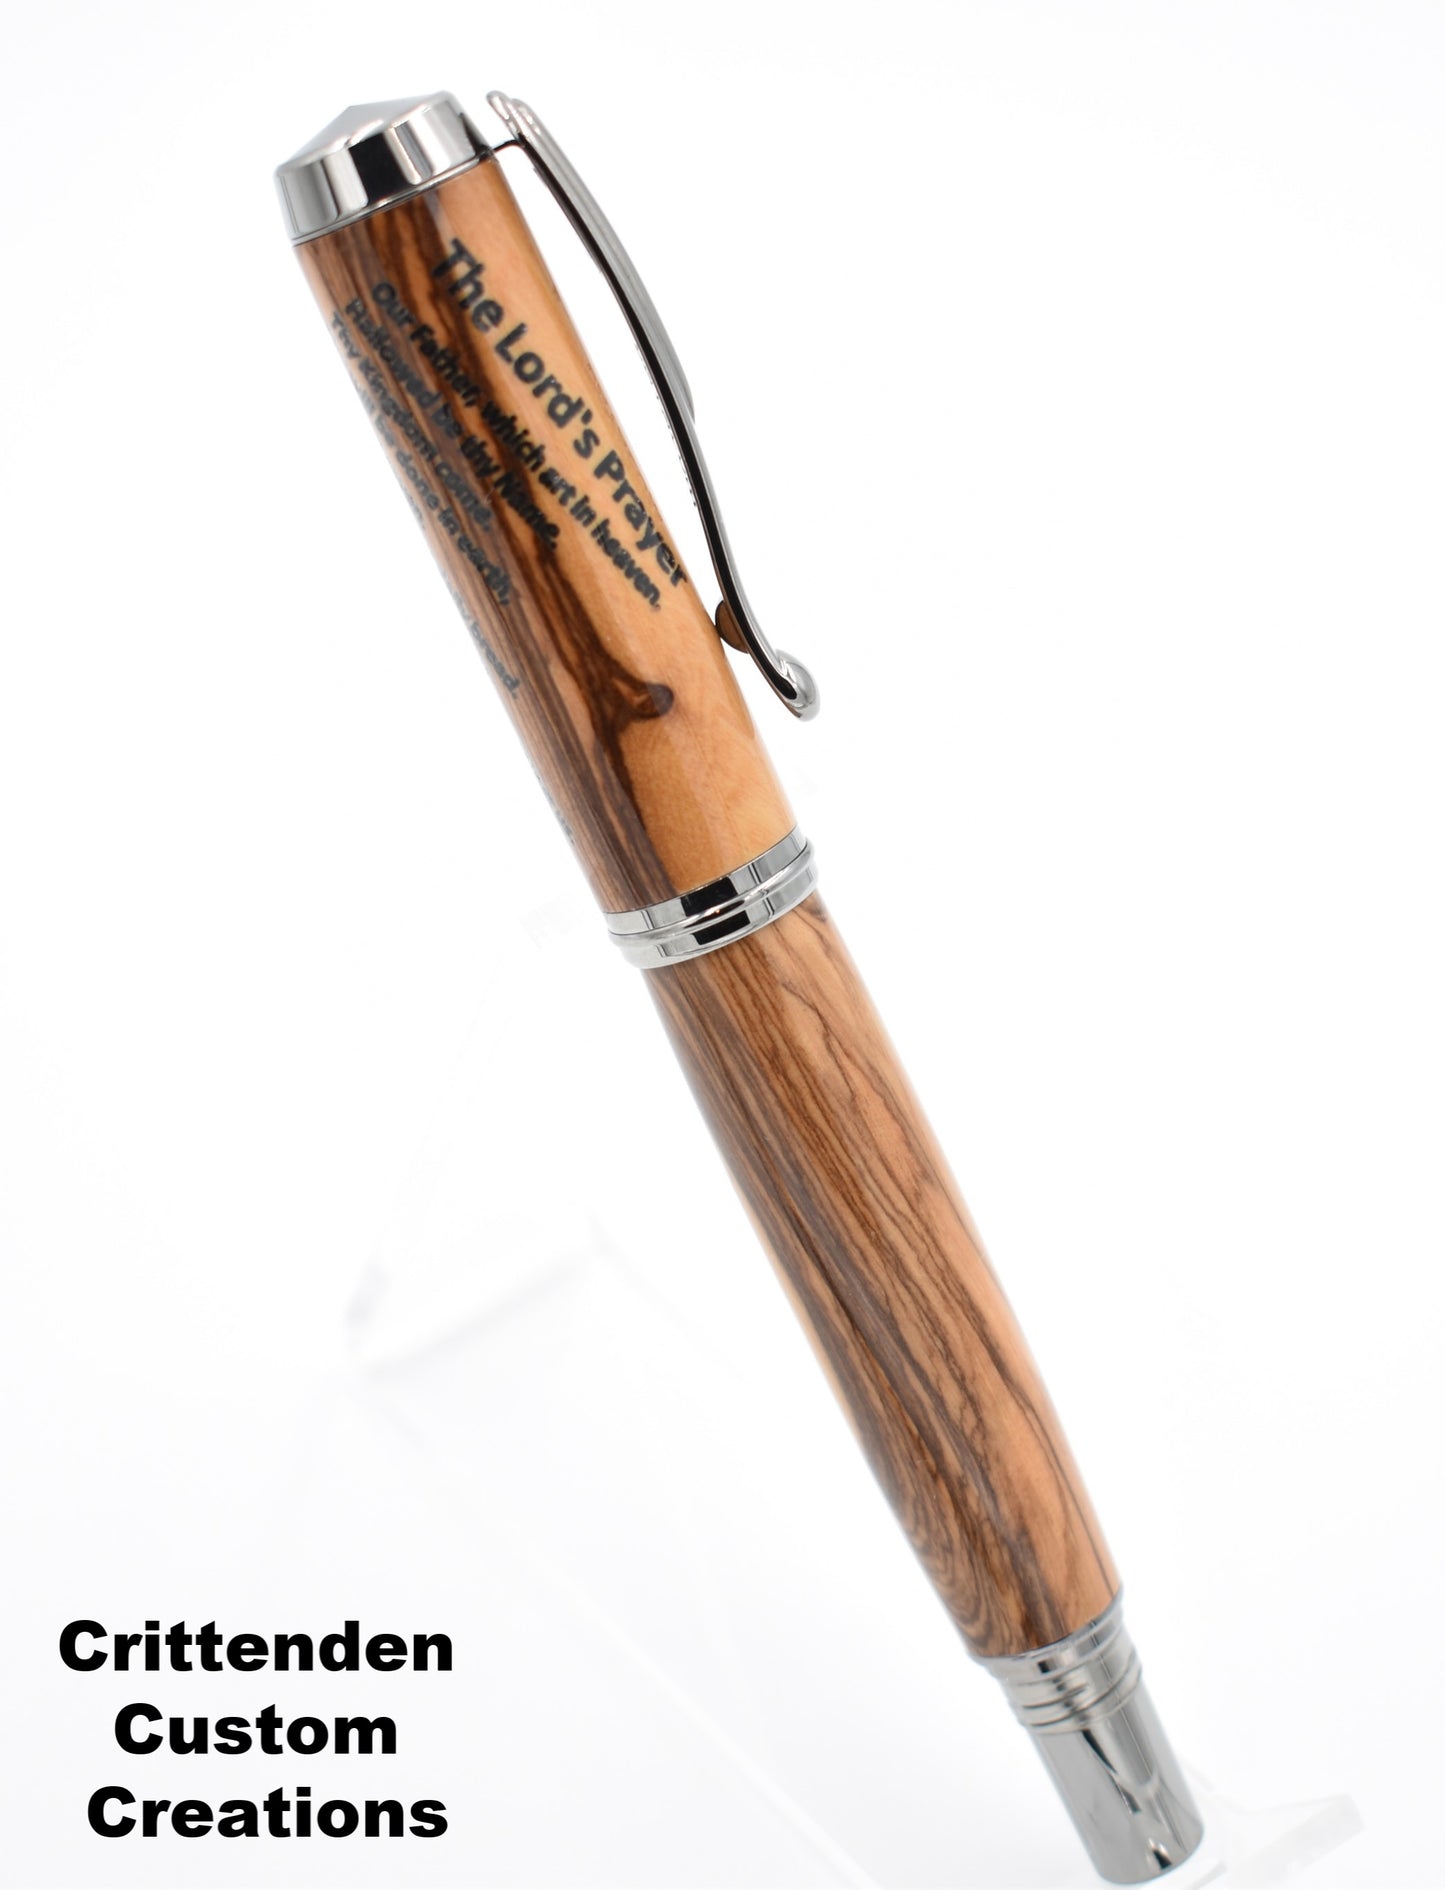 Bethlehem Olivewood engraved with "The Lord's Prayer" - Jr. George Rollerball